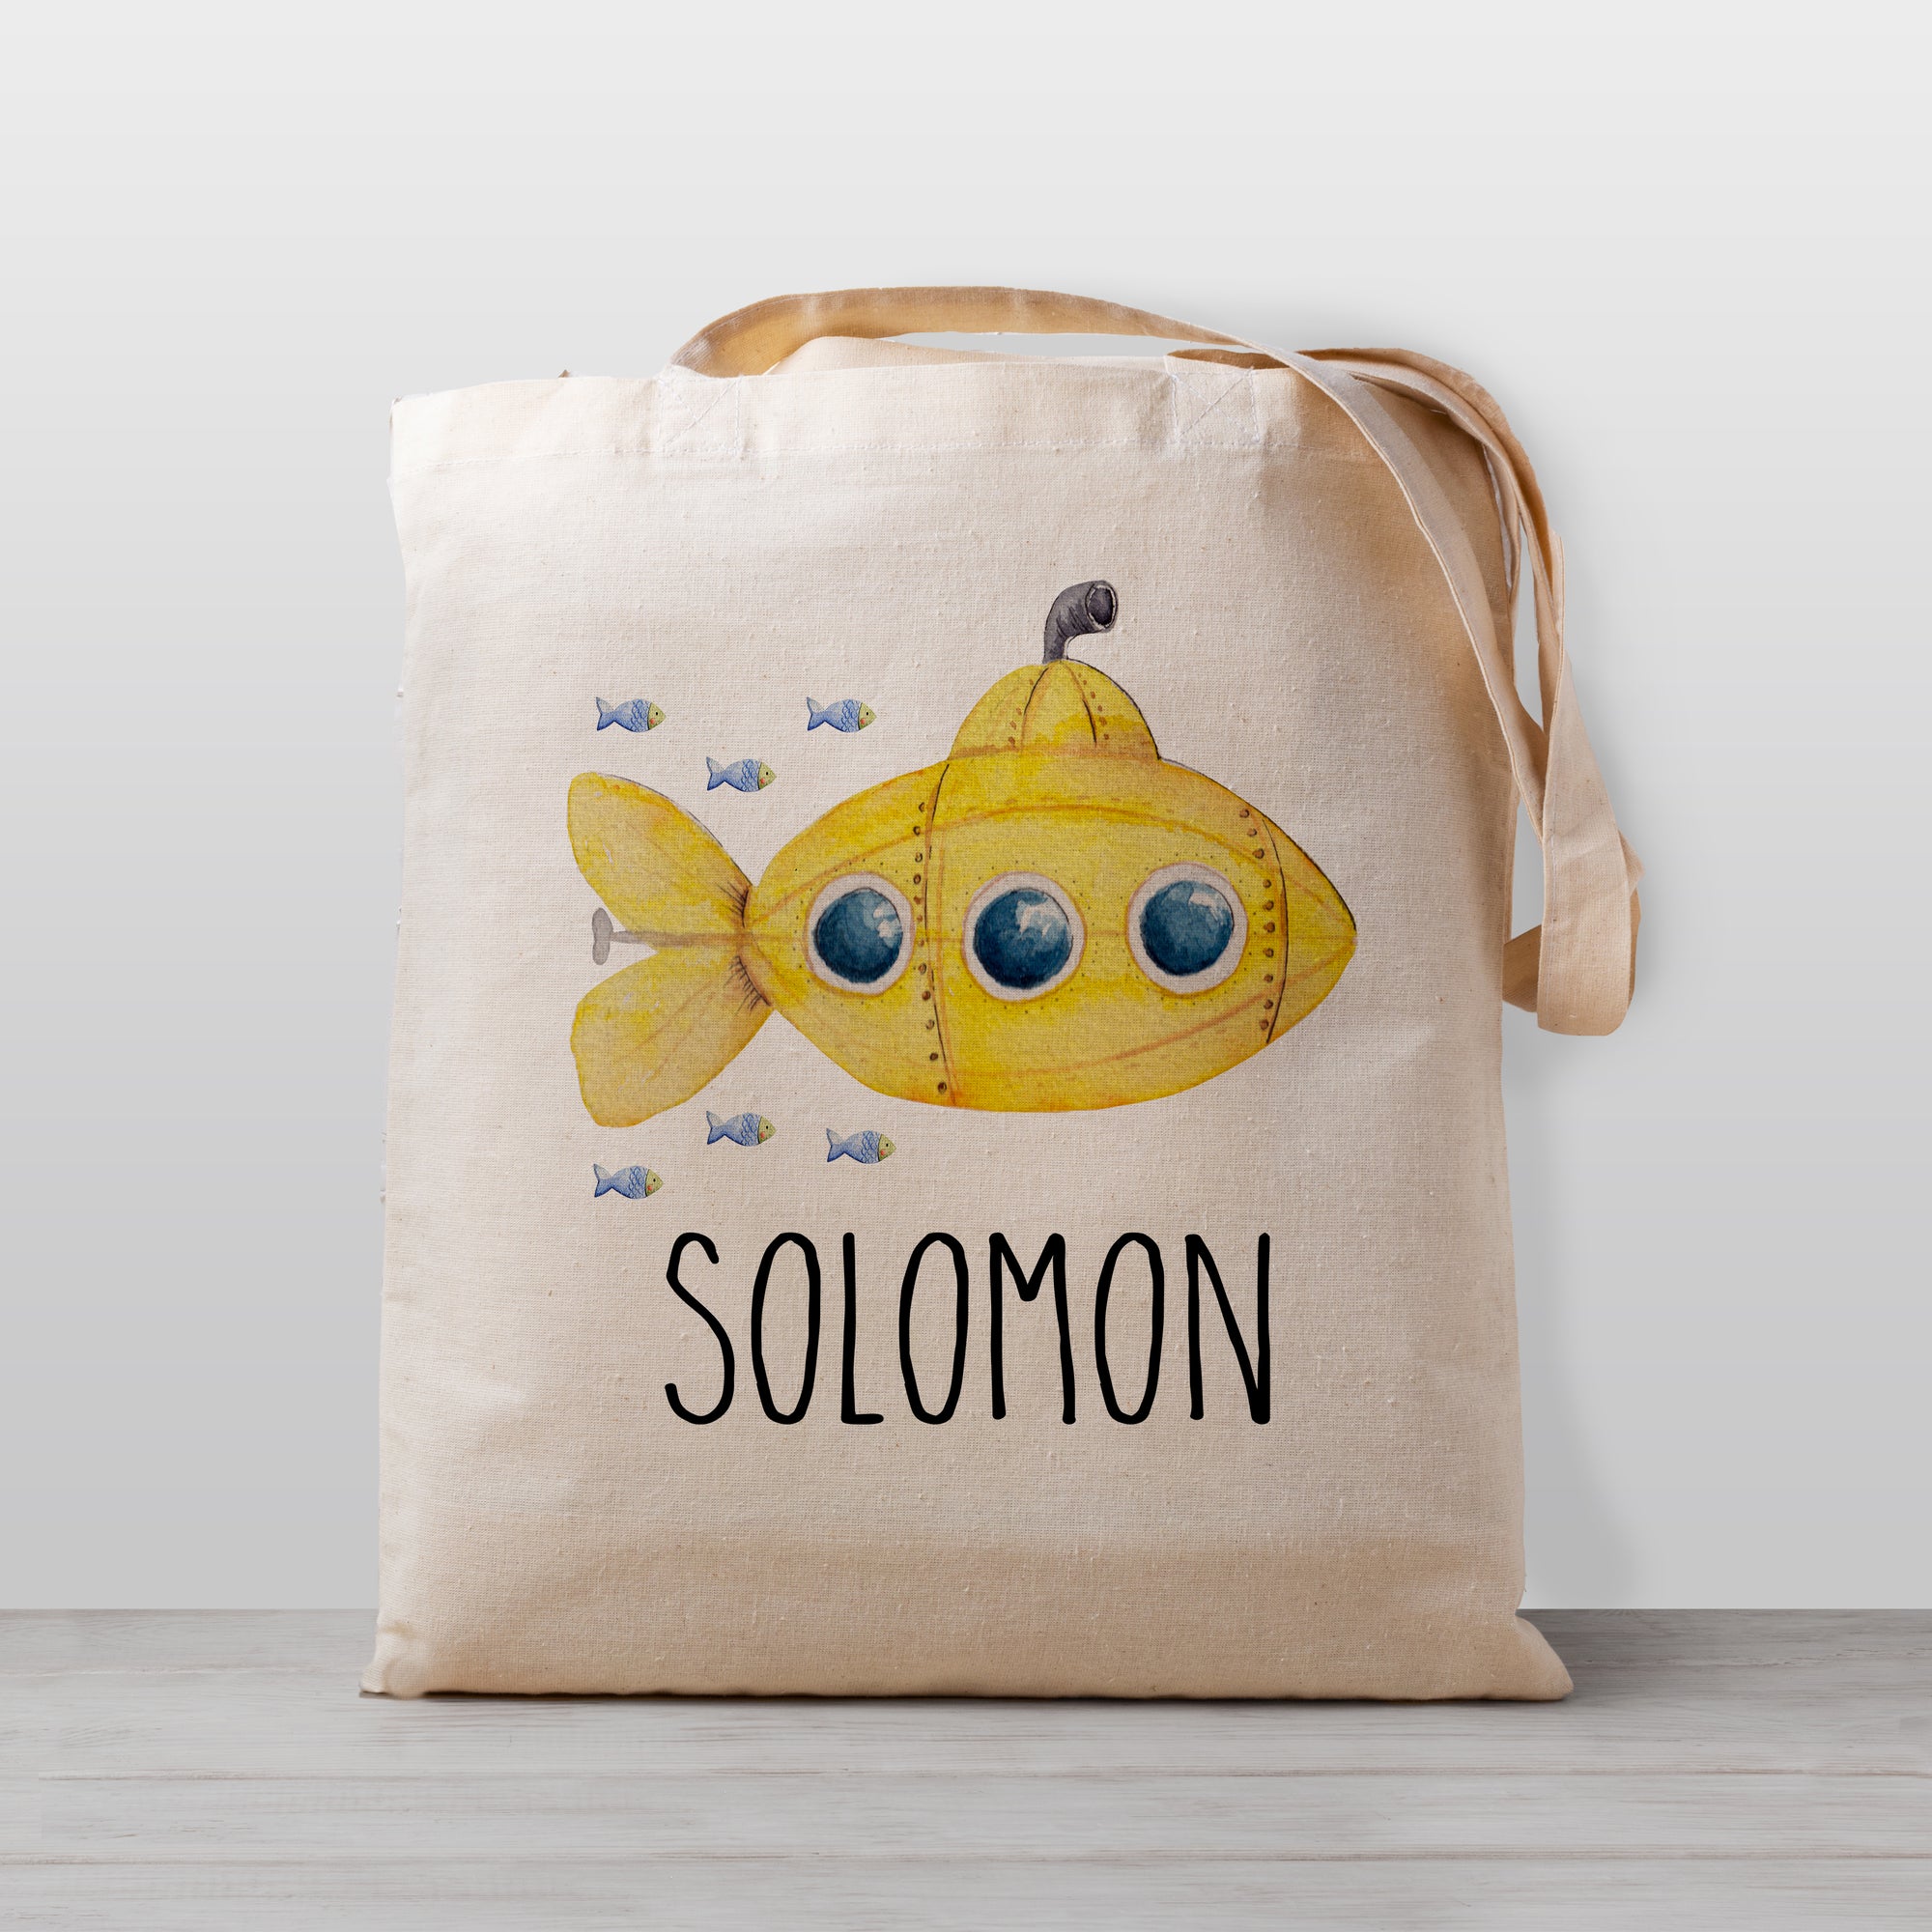 A submarine personalized tote bag, perfect for carrying your little one's stuff to preschool or kindergarten. This under the sea design even includes some cute fish following behind. Works great as a library book bag, too! 